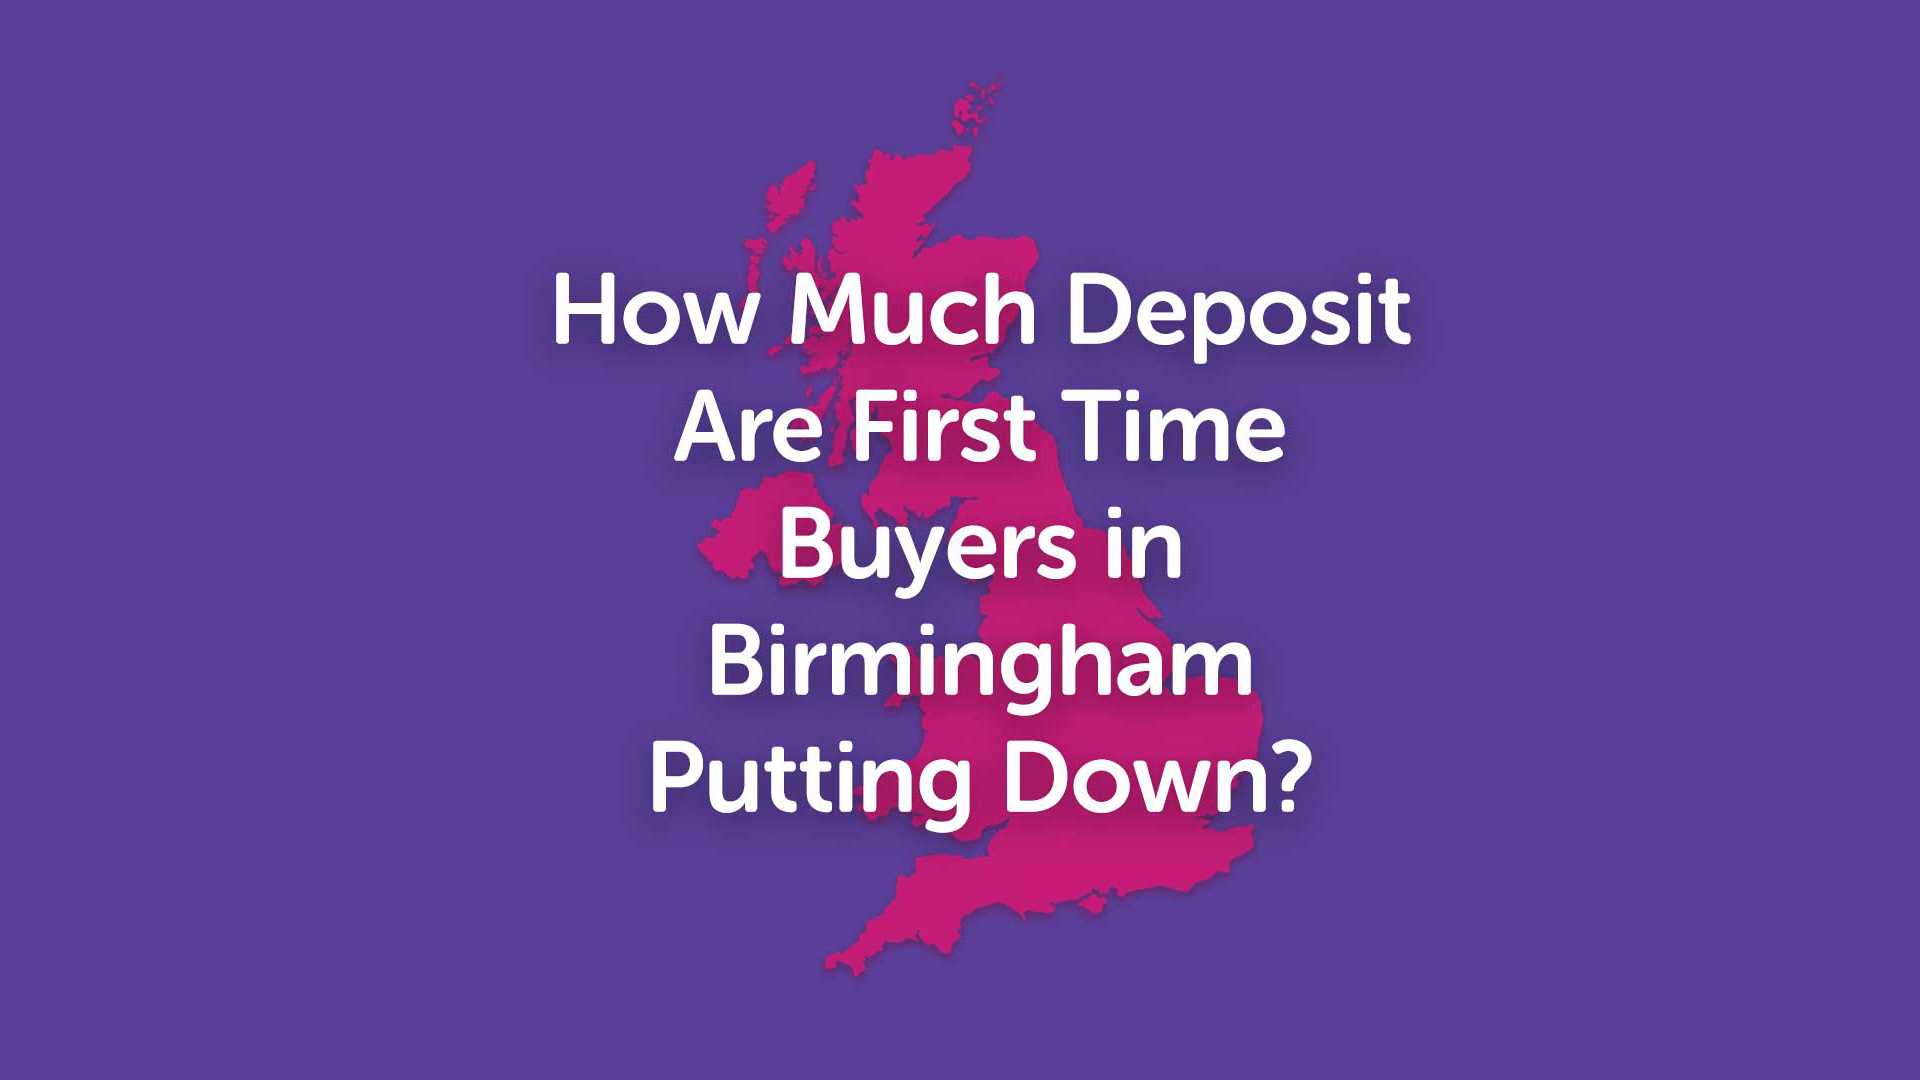 How Much Deposit Are First Time Buyers in Birmingham Putting Down?